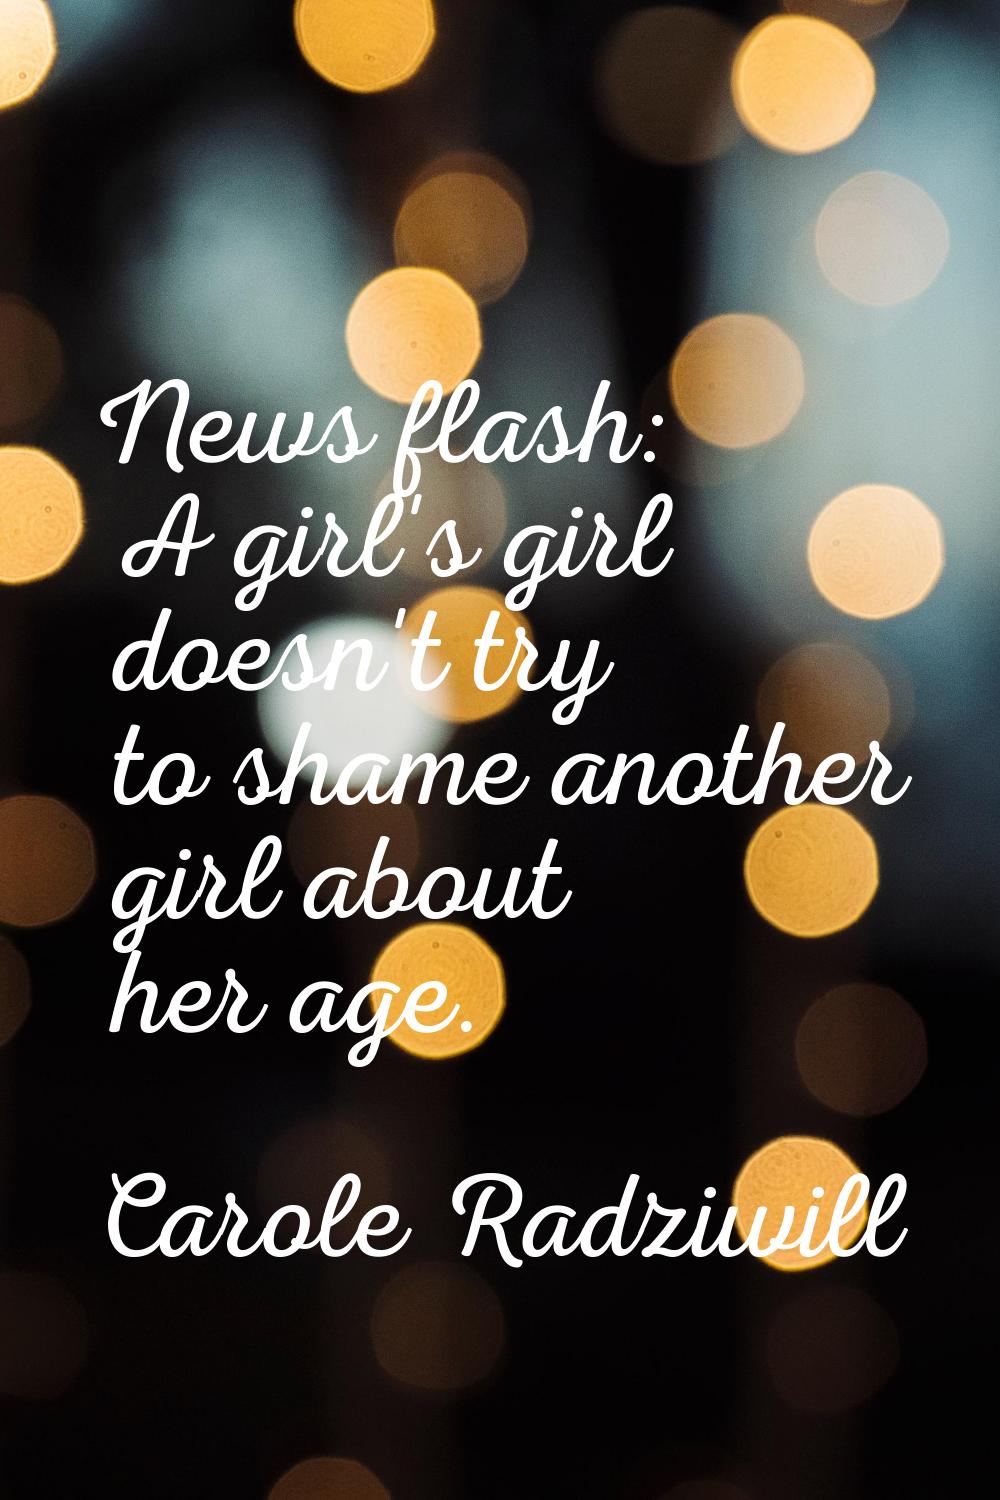 News flash: A girl's girl doesn't try to shame another girl about her age.